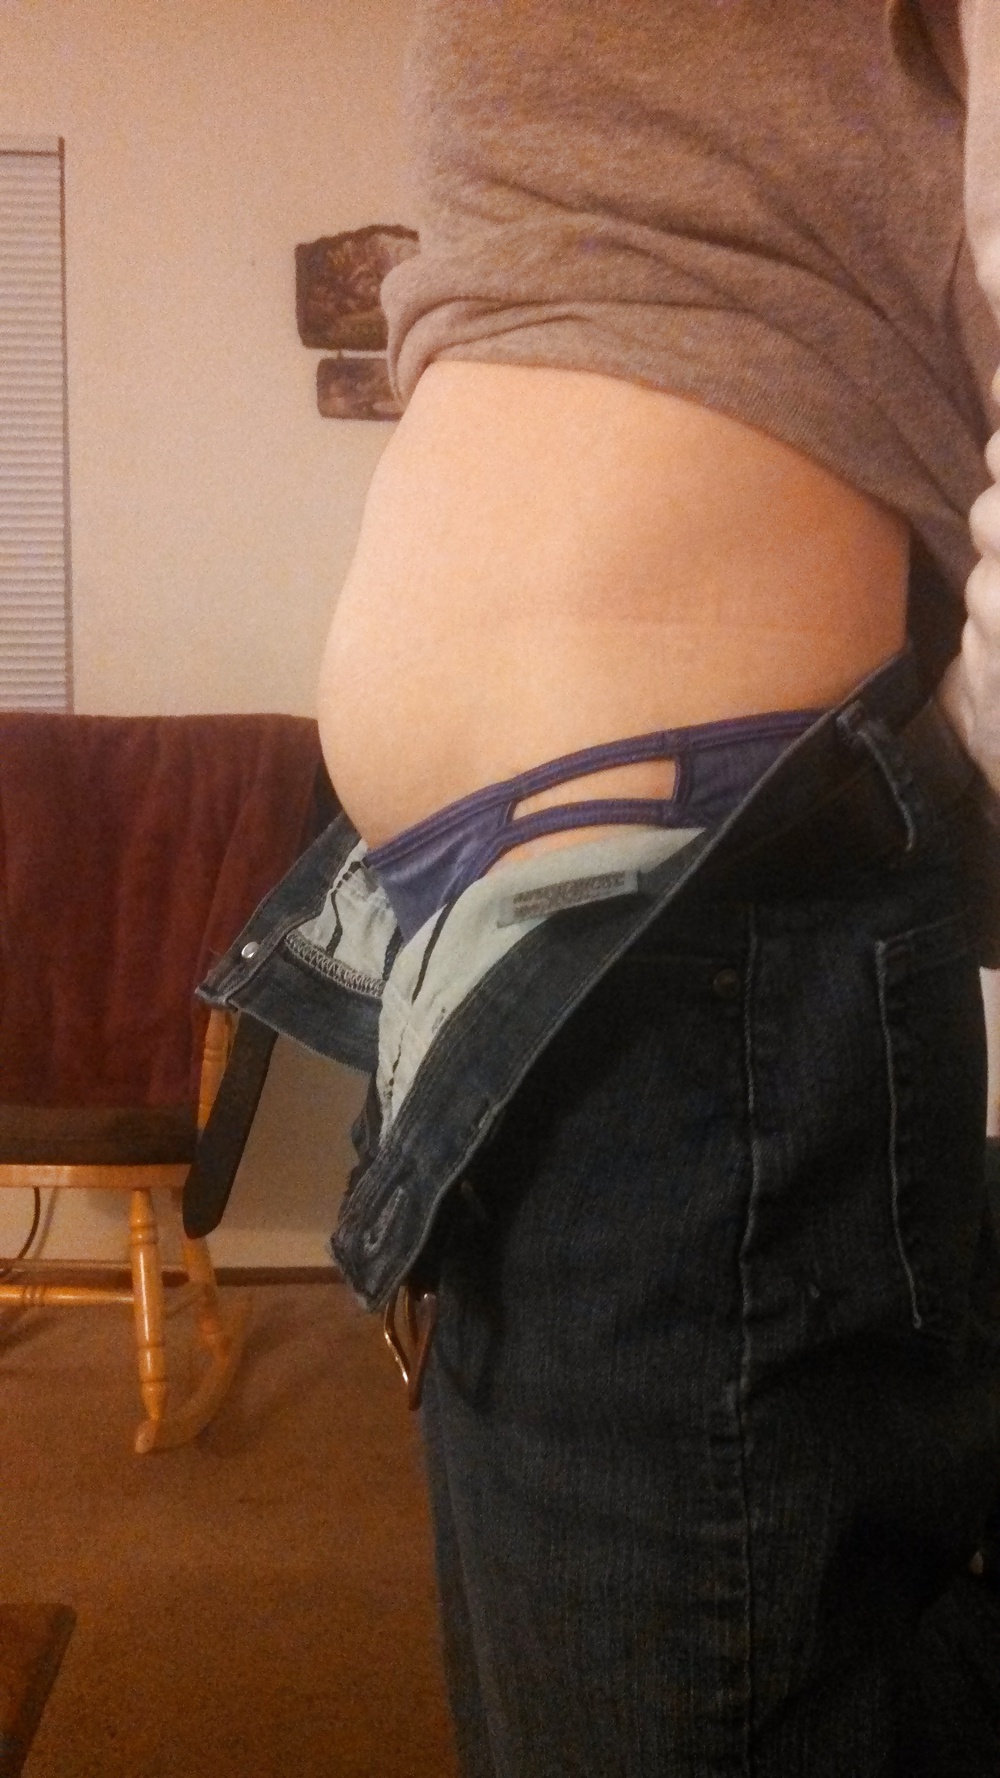 My hot wife's pregnant belly. #25717369